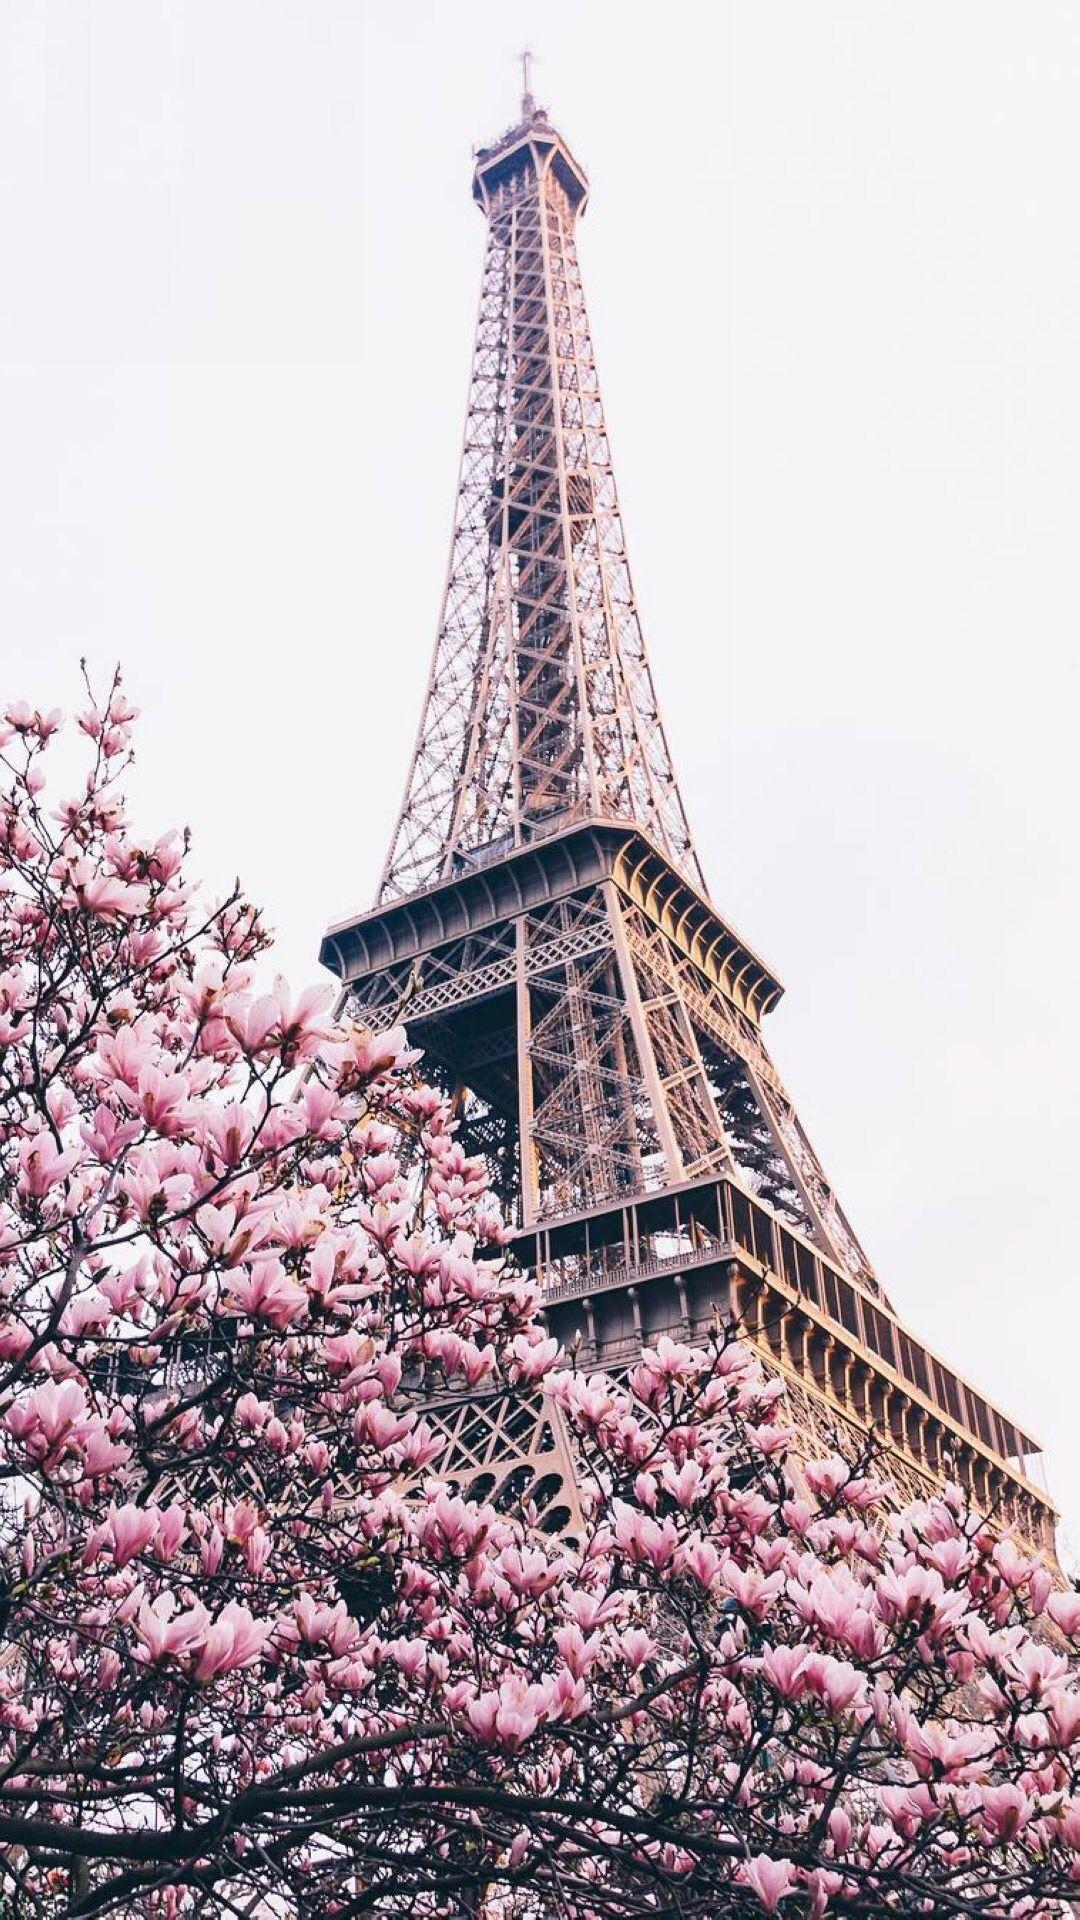 Aesthetic Eiffel Tower Wallpapers - Top Free Aesthetic Eiffel Tower